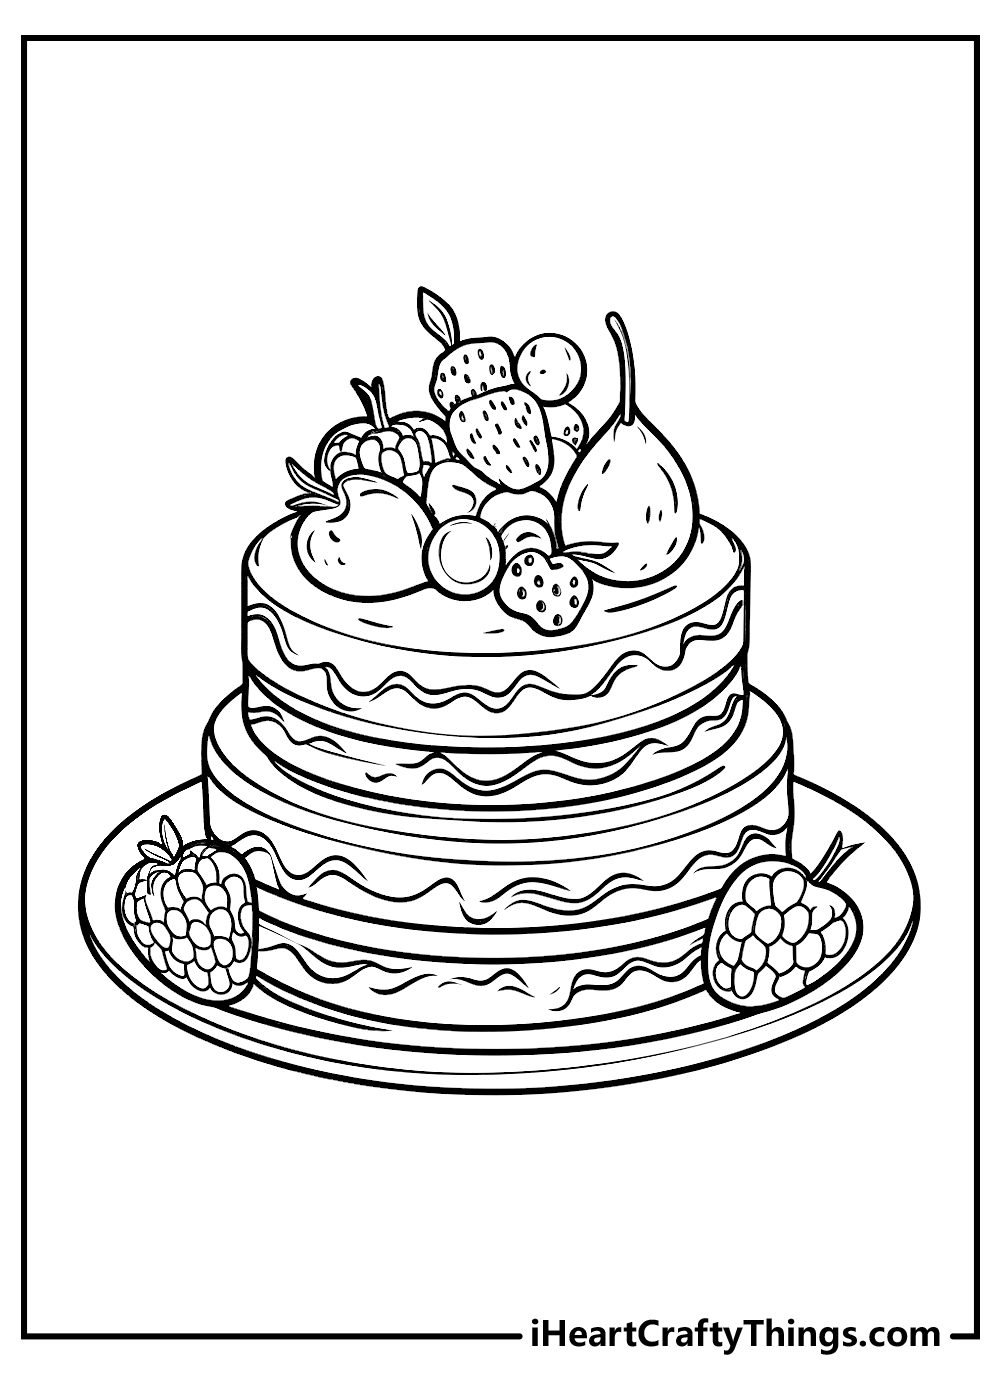 black-and-white dessert coloring pages